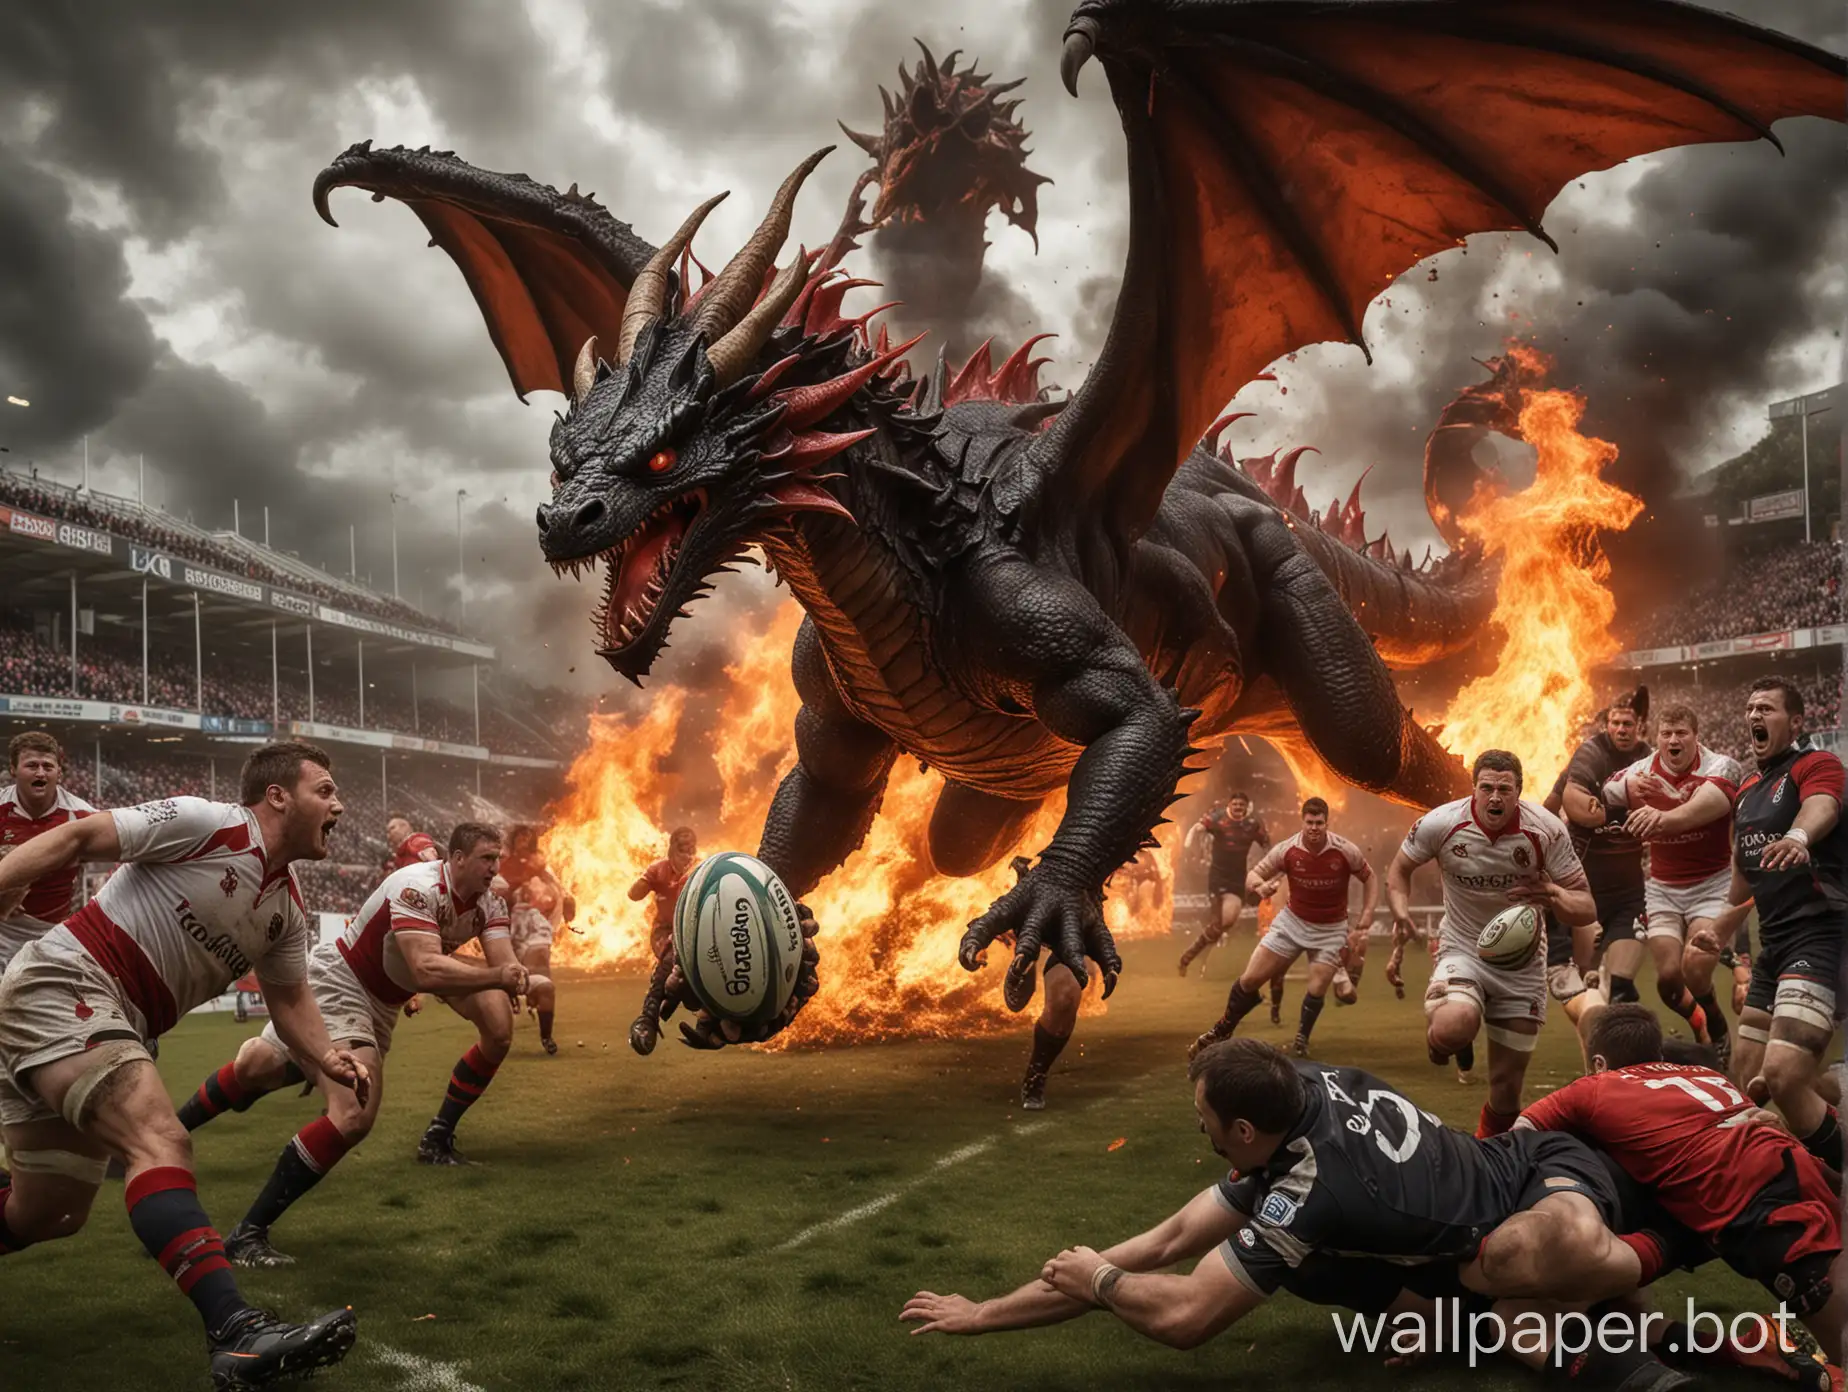 Fantasy-Rugby-Match-Dragons-Breathing-Fire